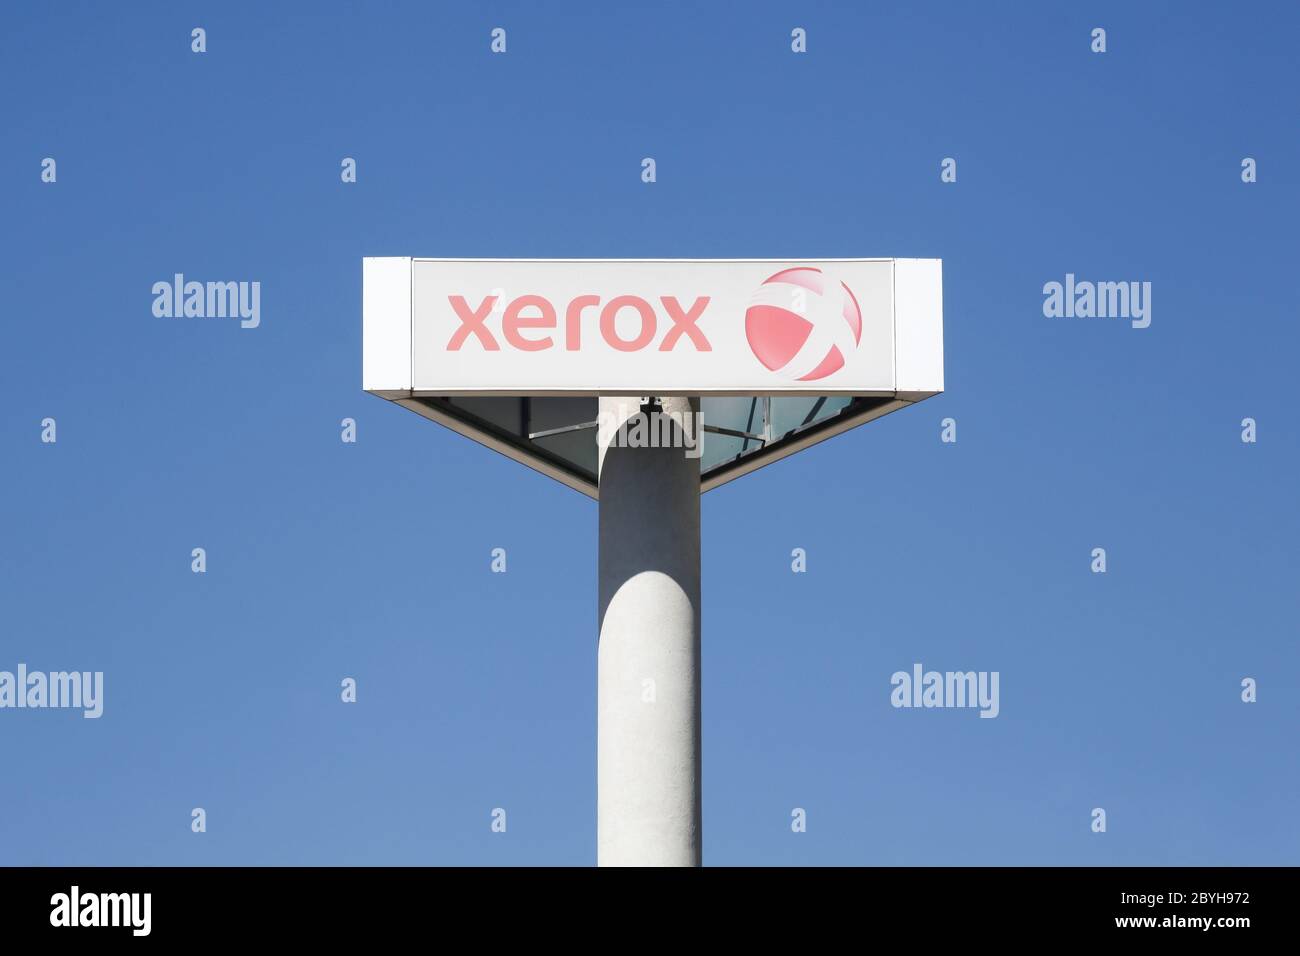 Nimes, France - July 1, 2018: Xerox sign on a pole. Xerox is an American global corporation that sells business services Stock Photo